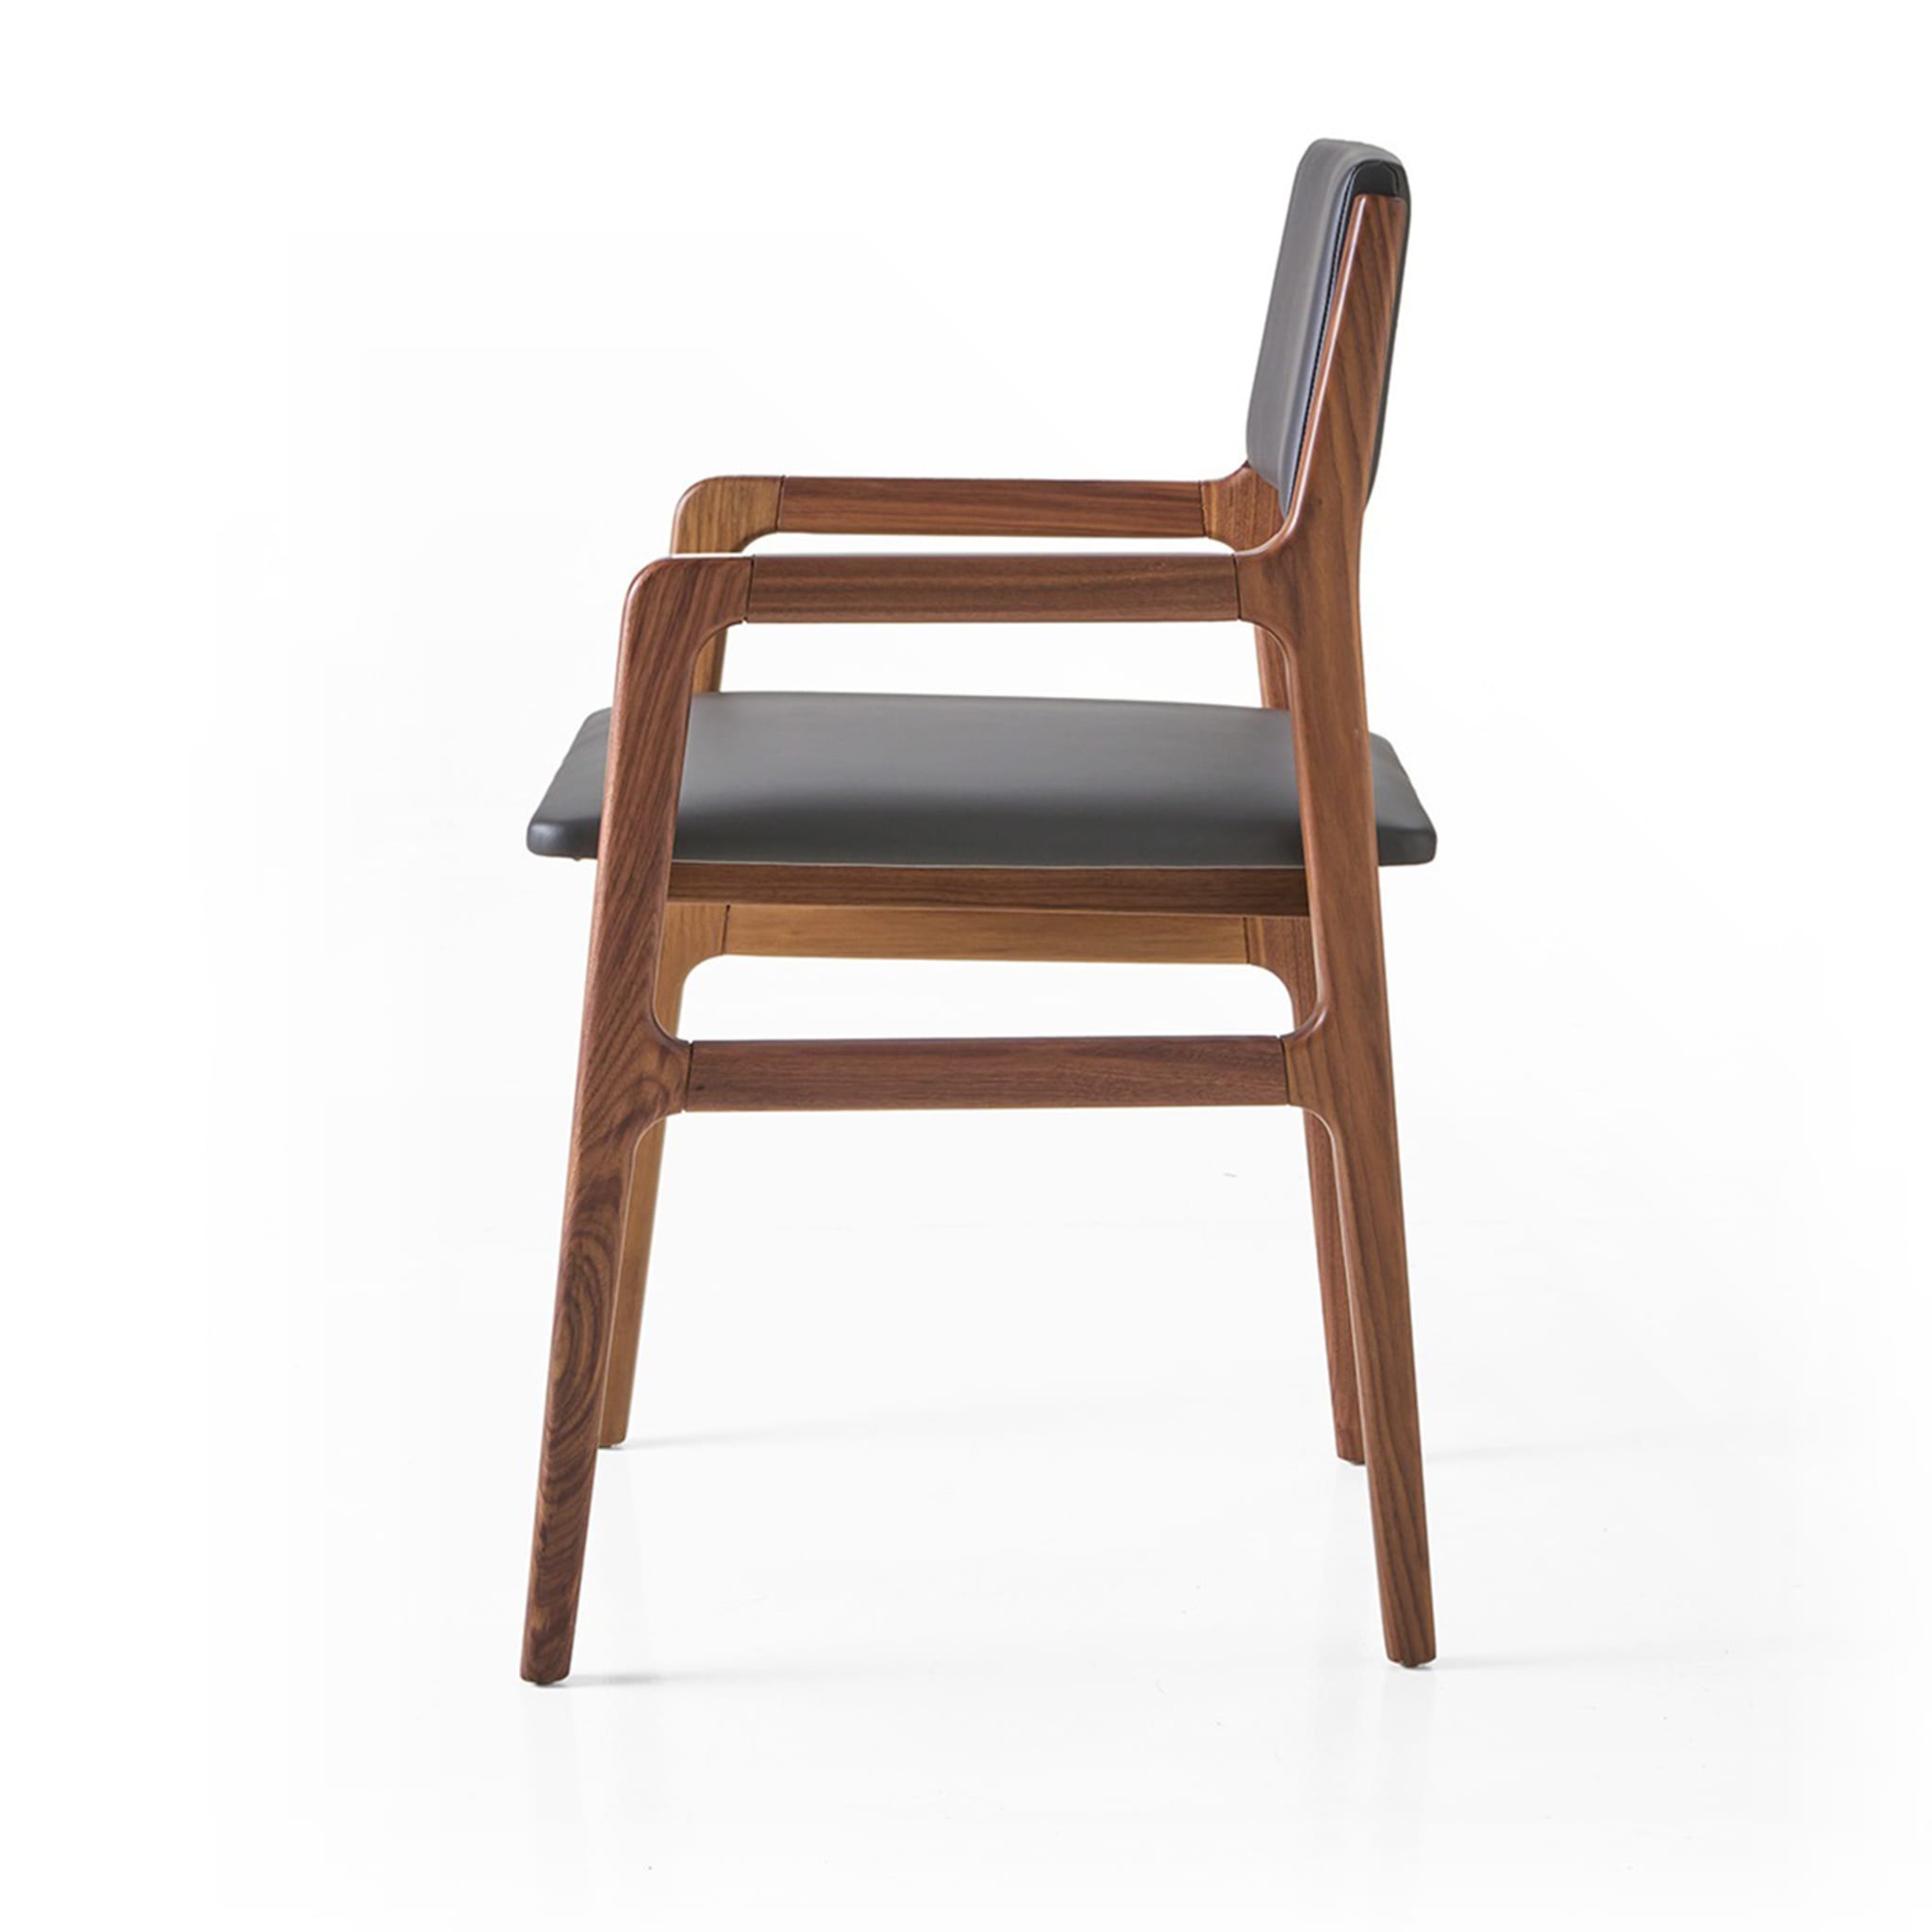 Shanghai chair with armrests - Alternative view 2